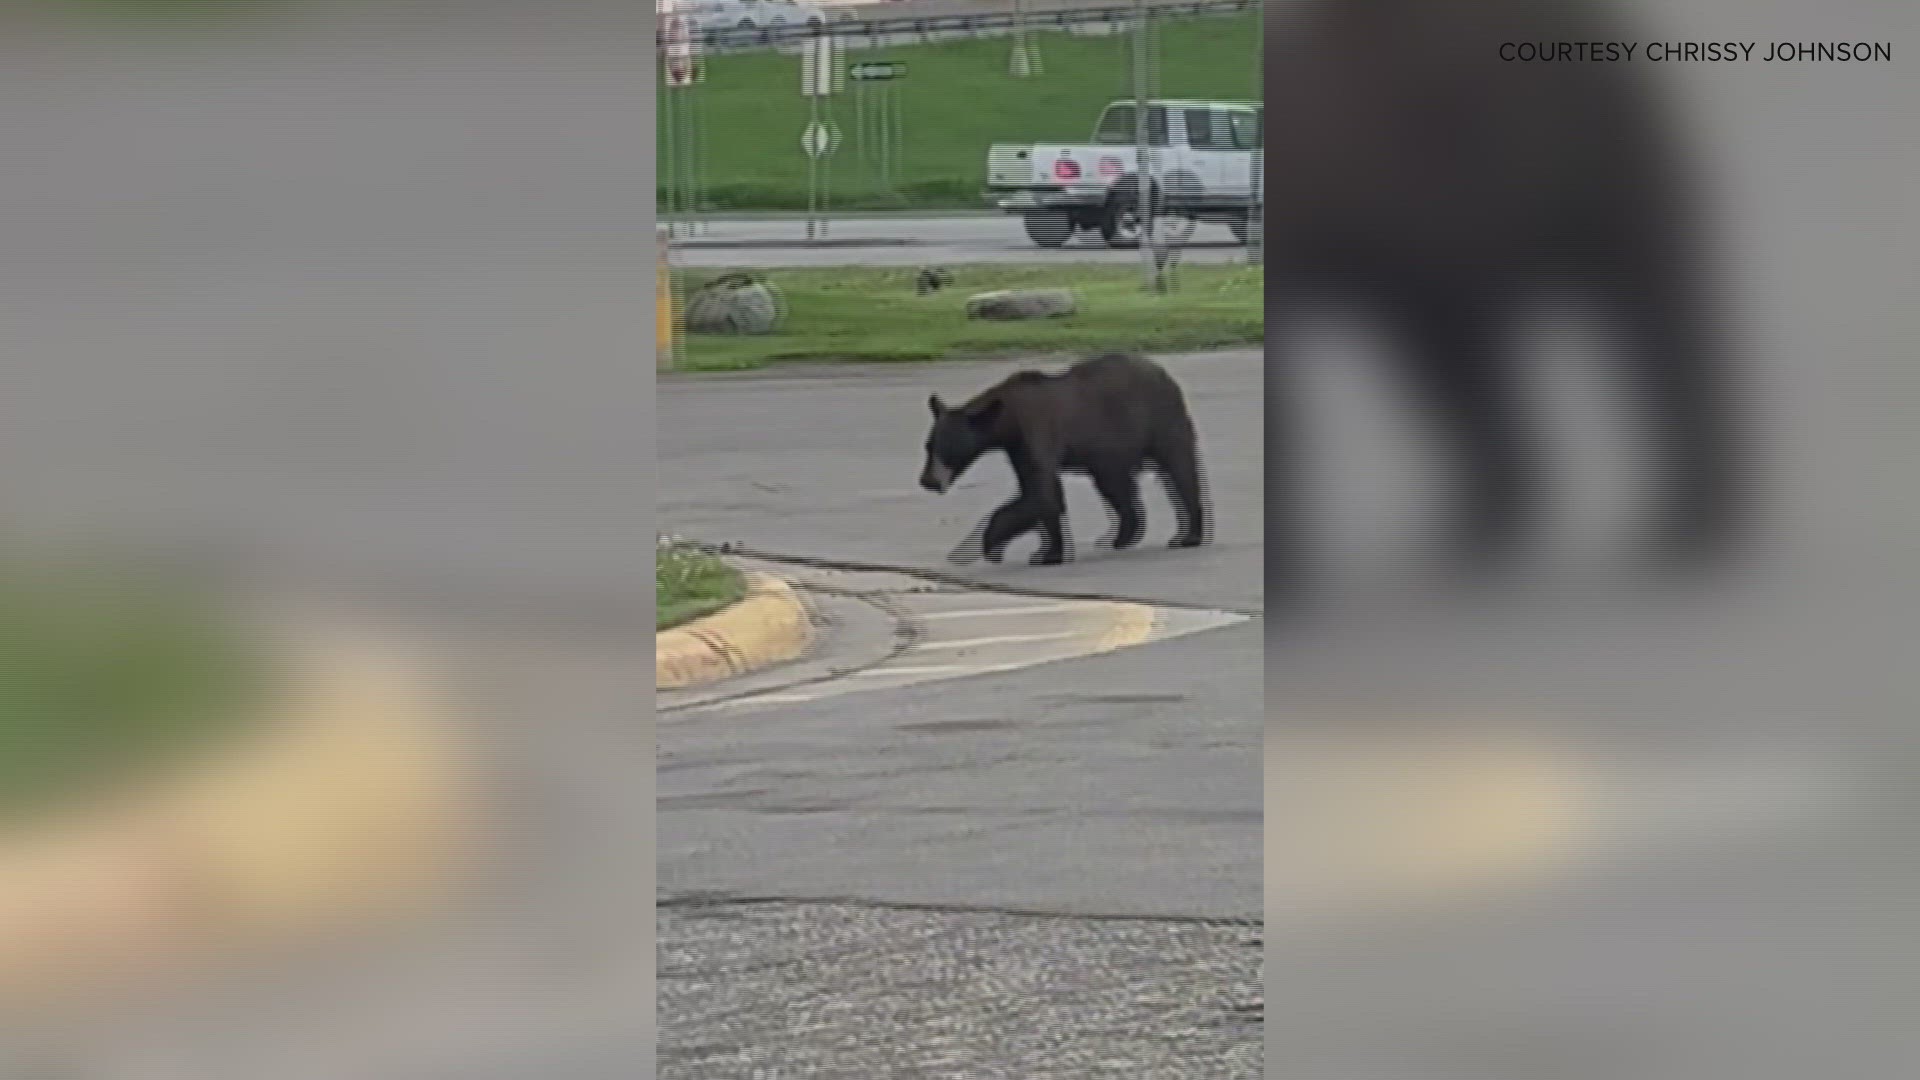 On May 19, Rogers Police tweeted that a bear was seen in the city's Mallard Estates neighborhood, located off 141st Avenue North, just east of Highway 101.